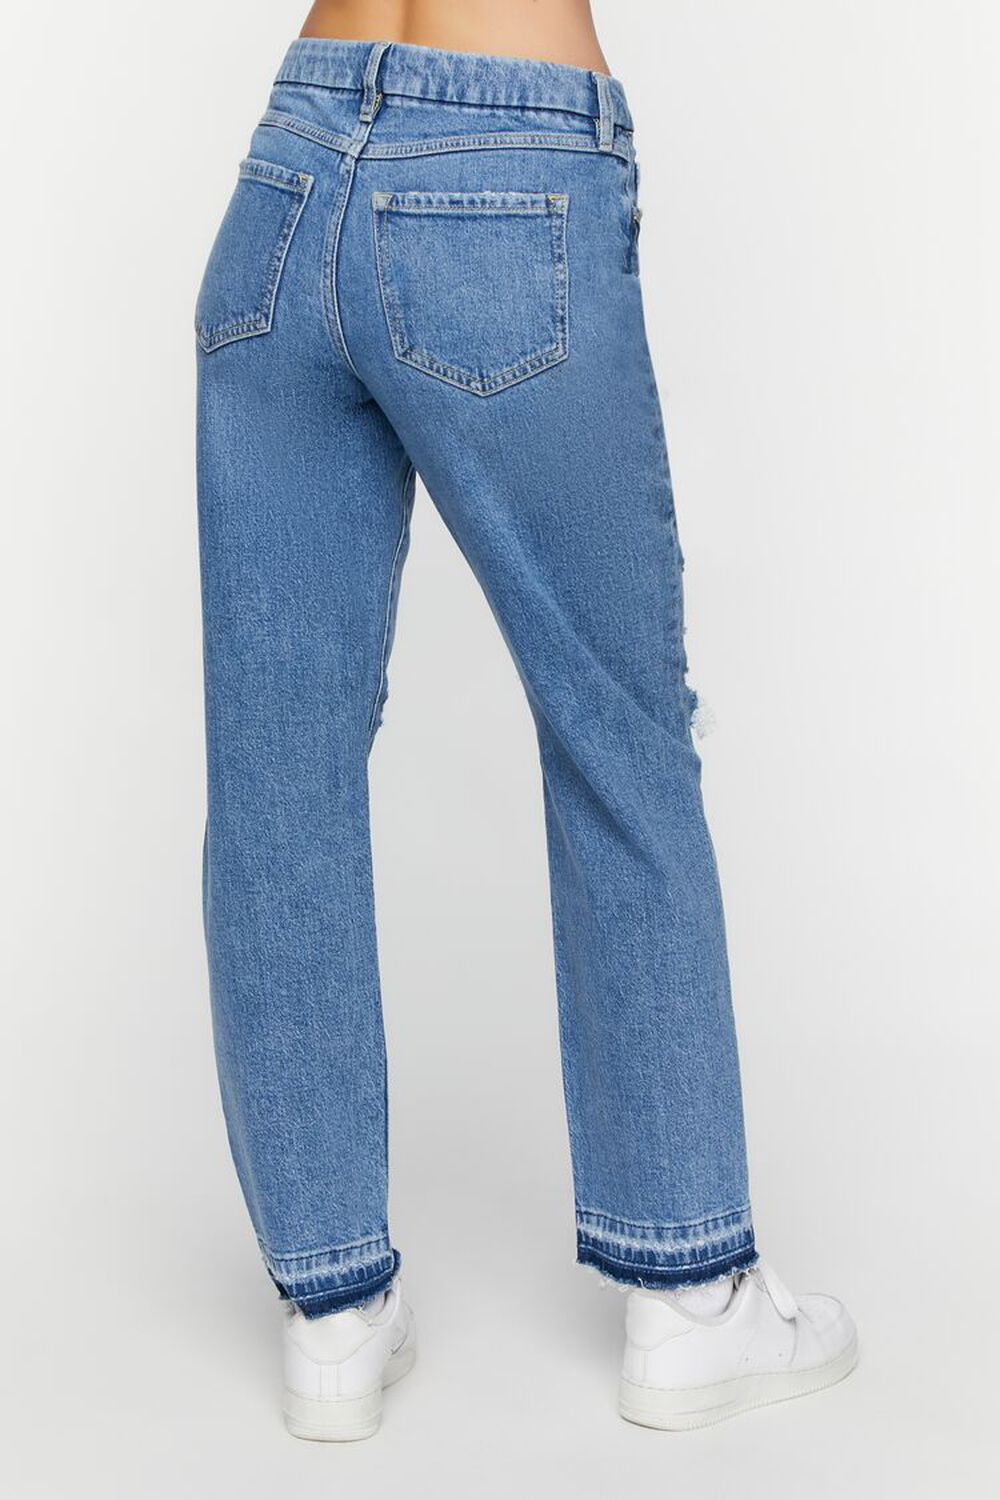 LIGHT DENIM Recycled Cotton Distressed Straight-Leg Jeans, image 3